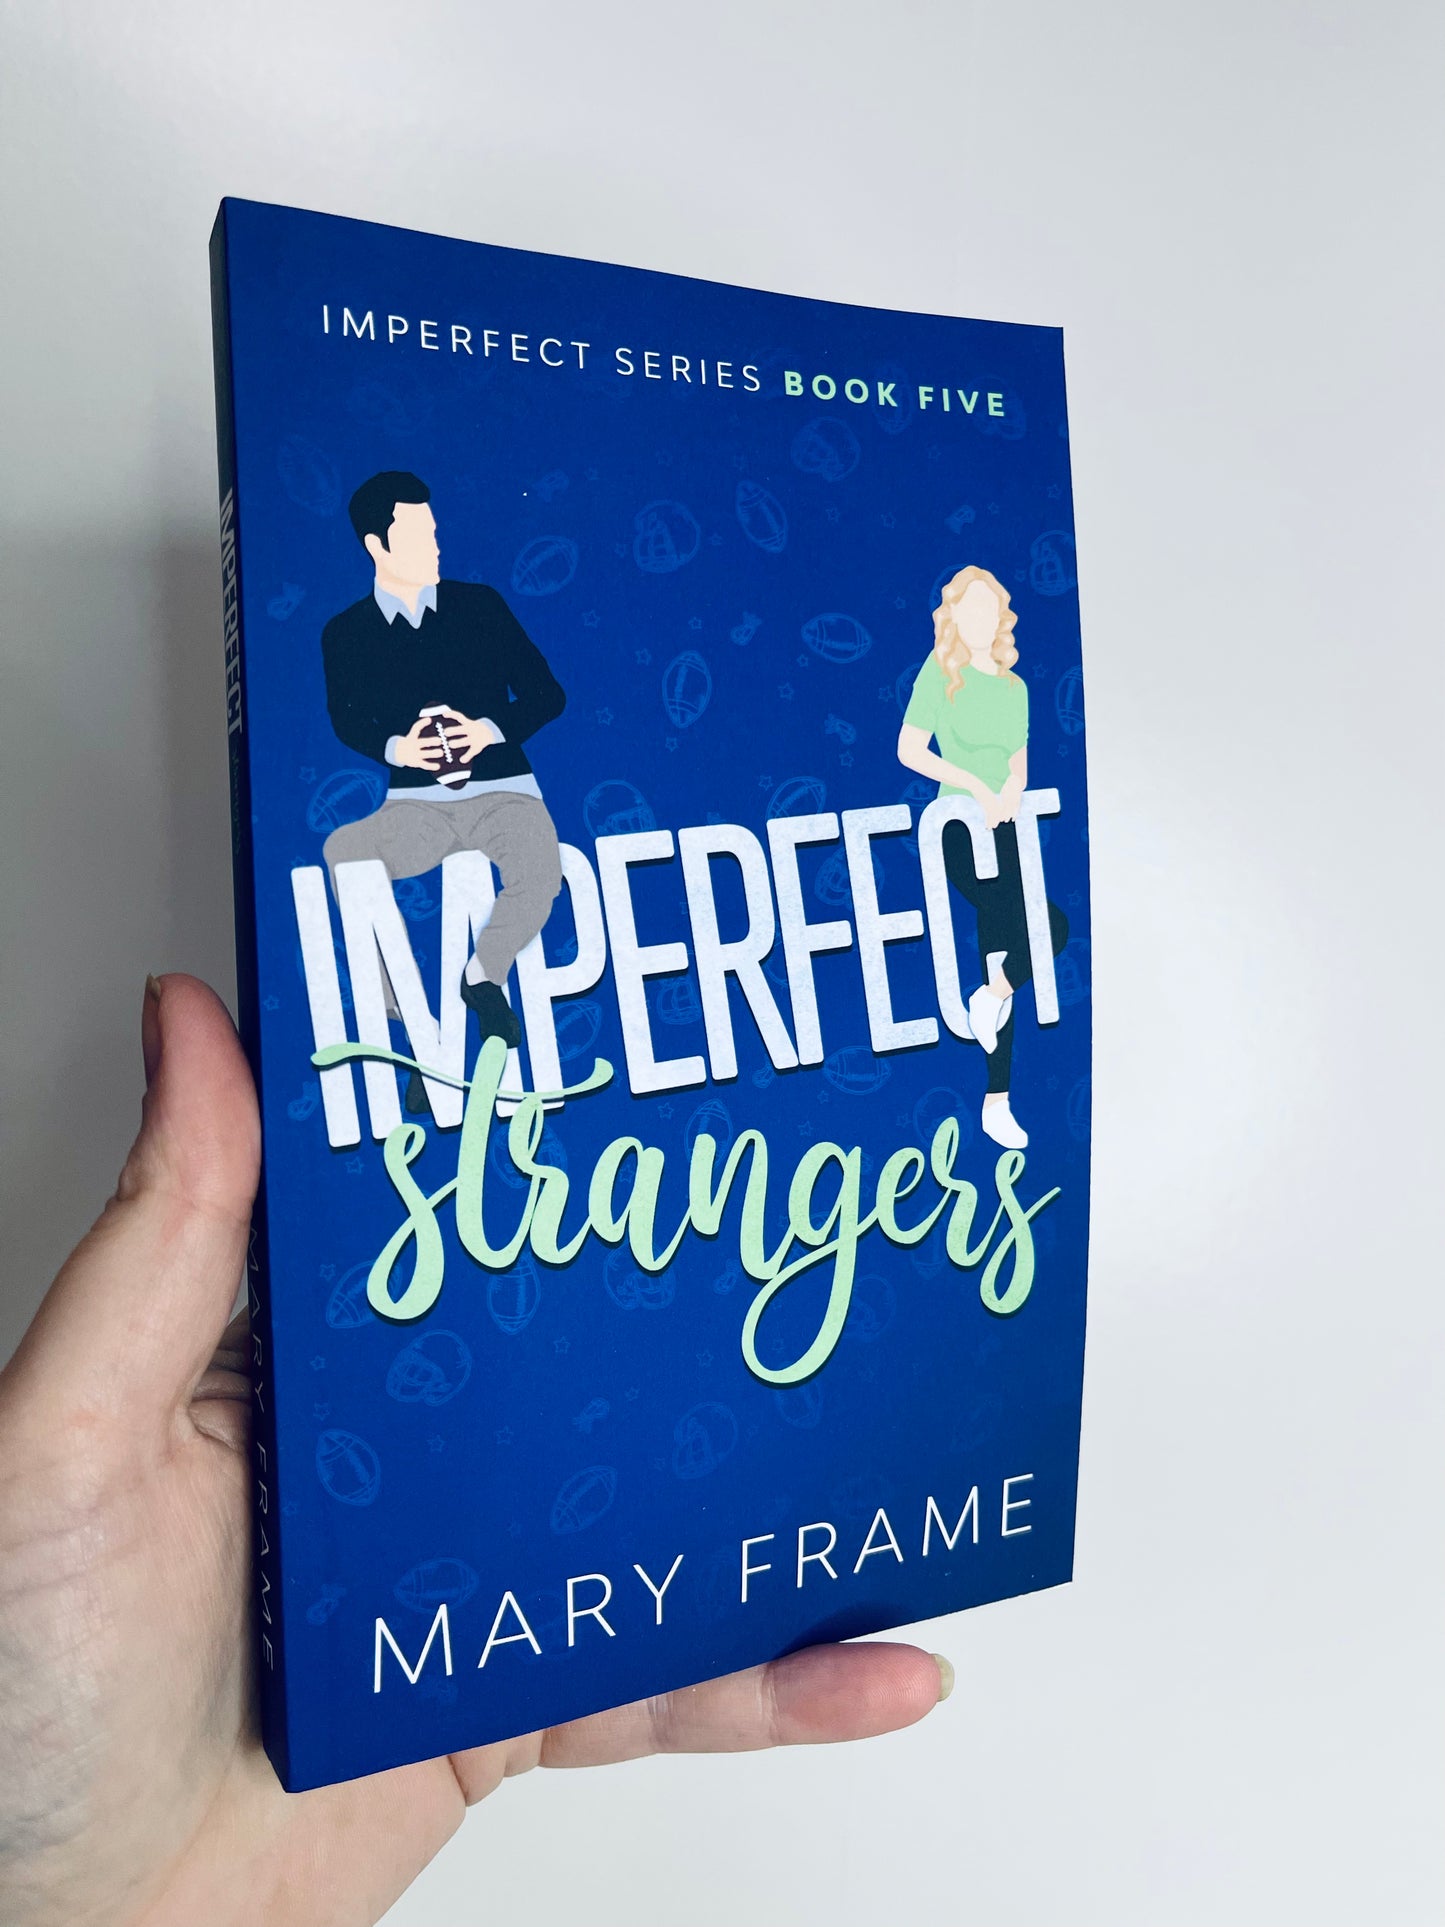 Imperfect Series by Mary Frame